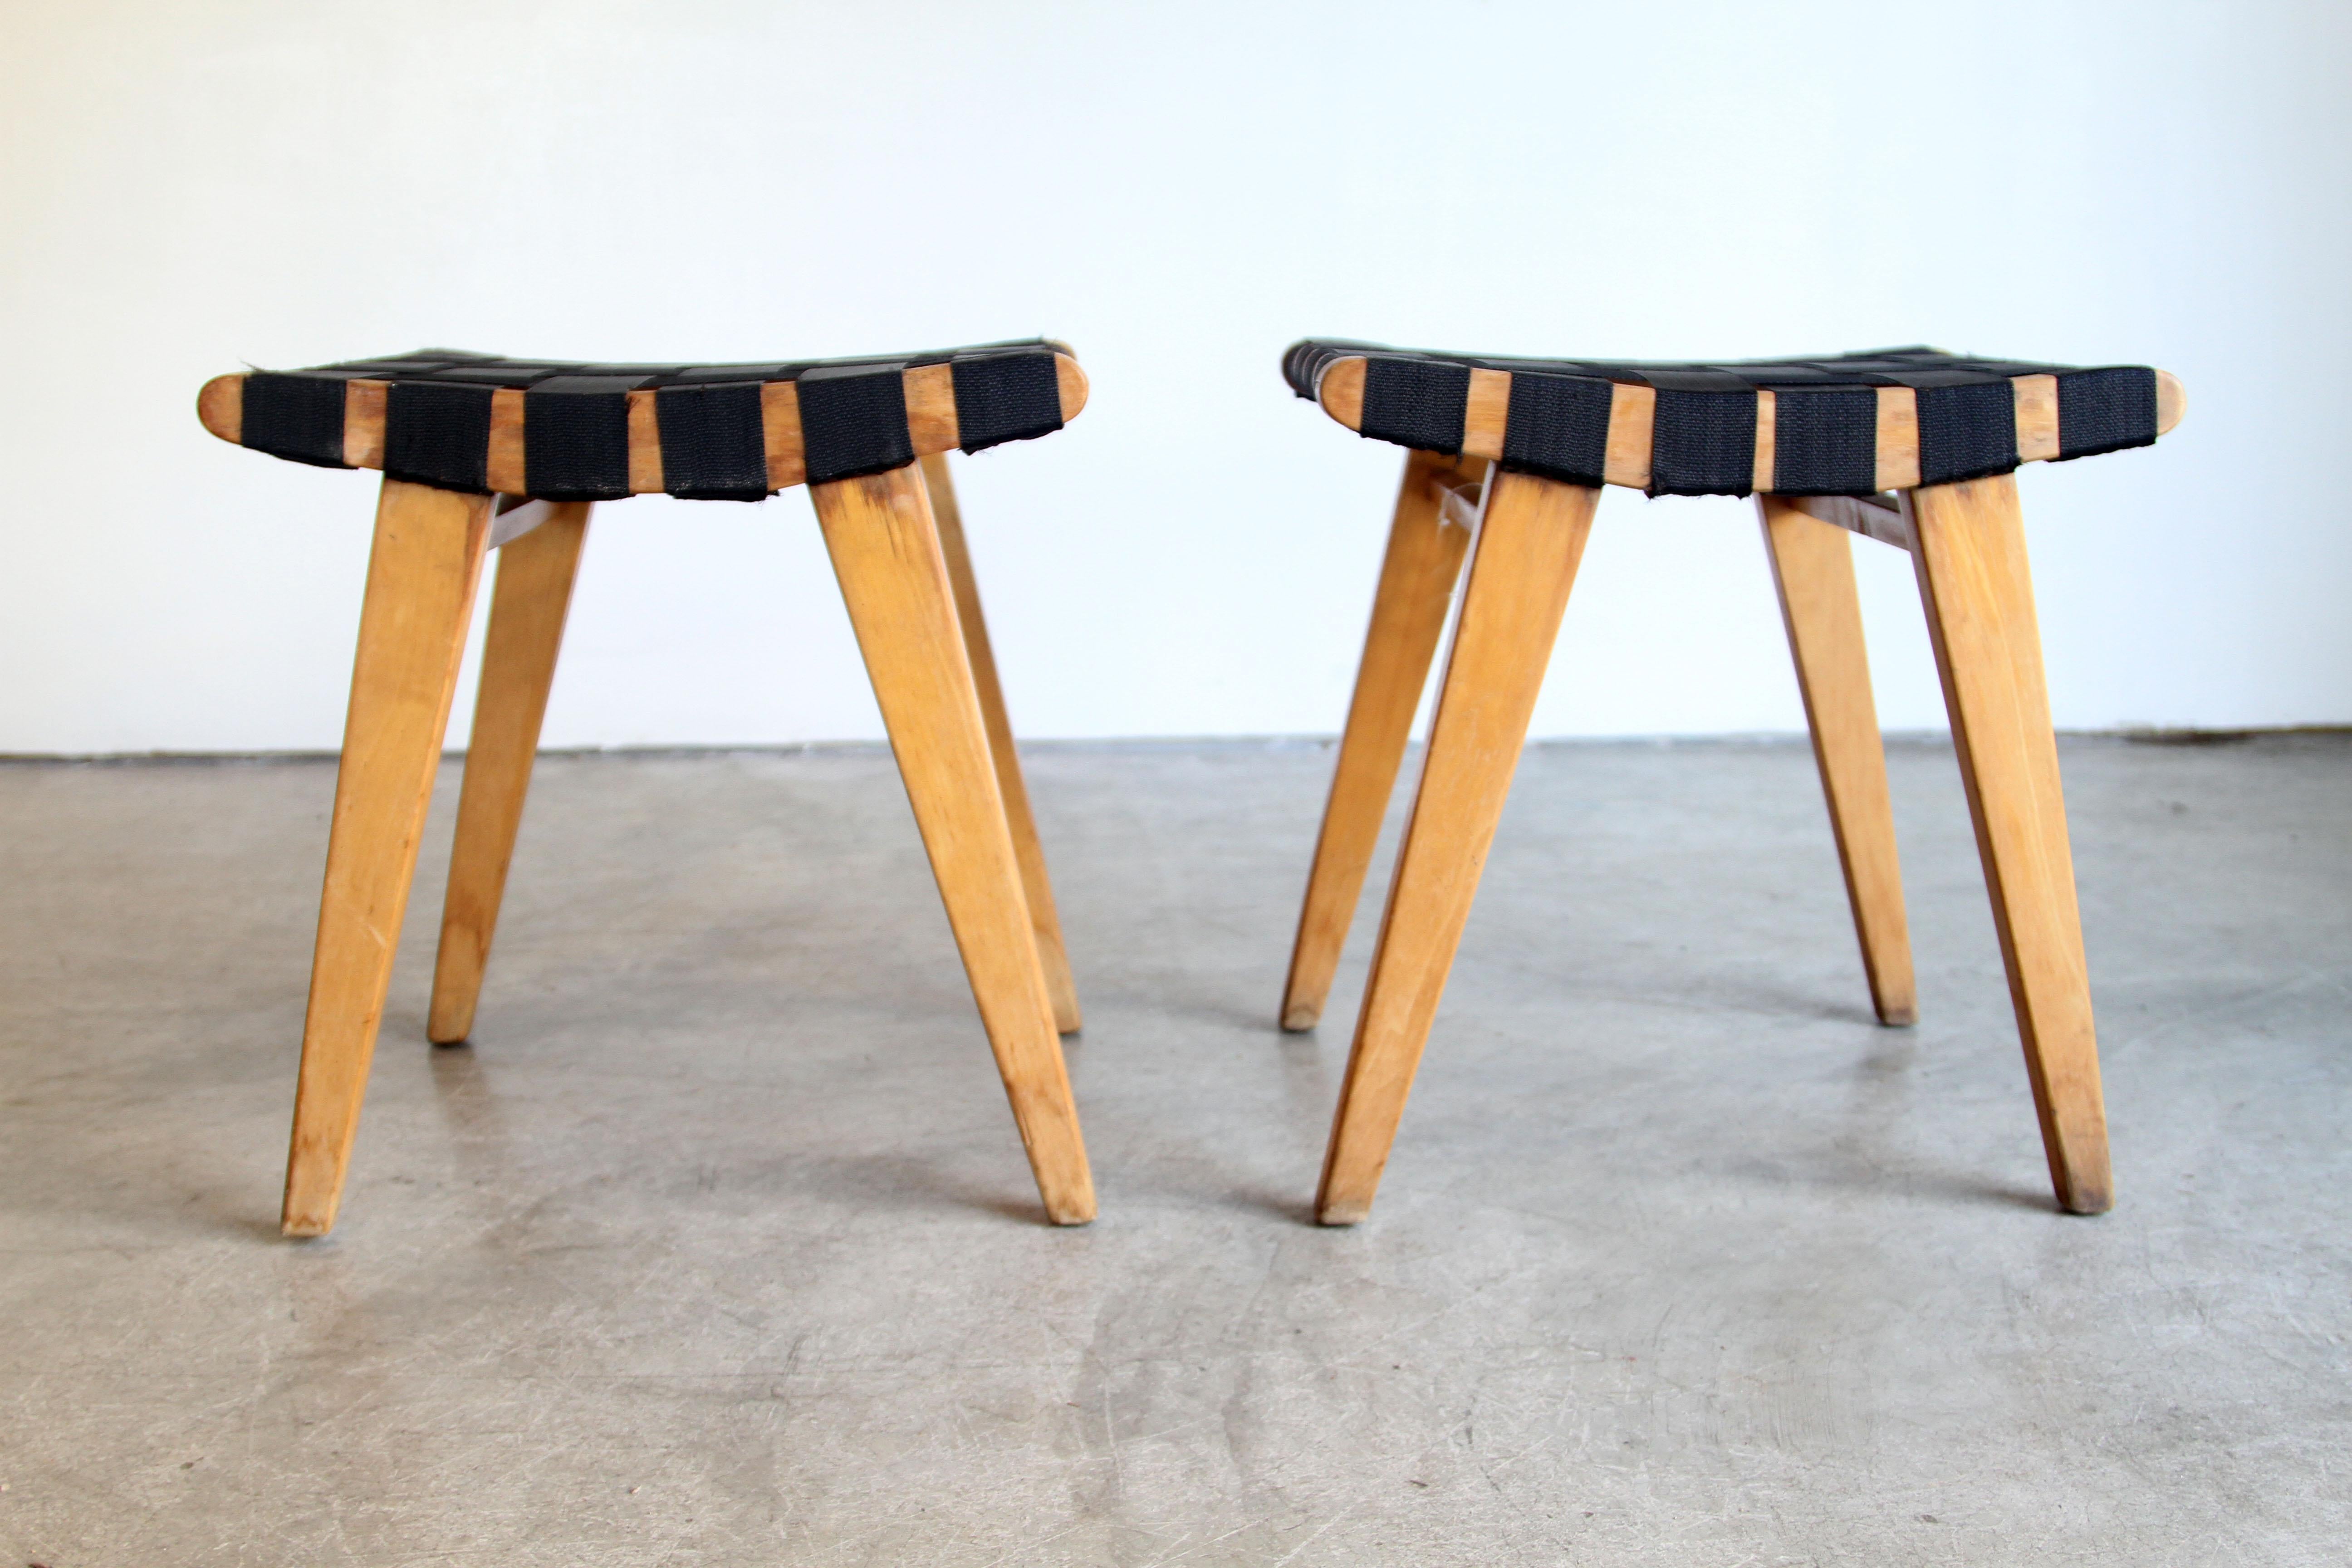 Designer: Jens Risom 
Manufacture: Hans G Knoll
Period/style: Mid-Century Modern 
Country: US 
Date: 1950s.